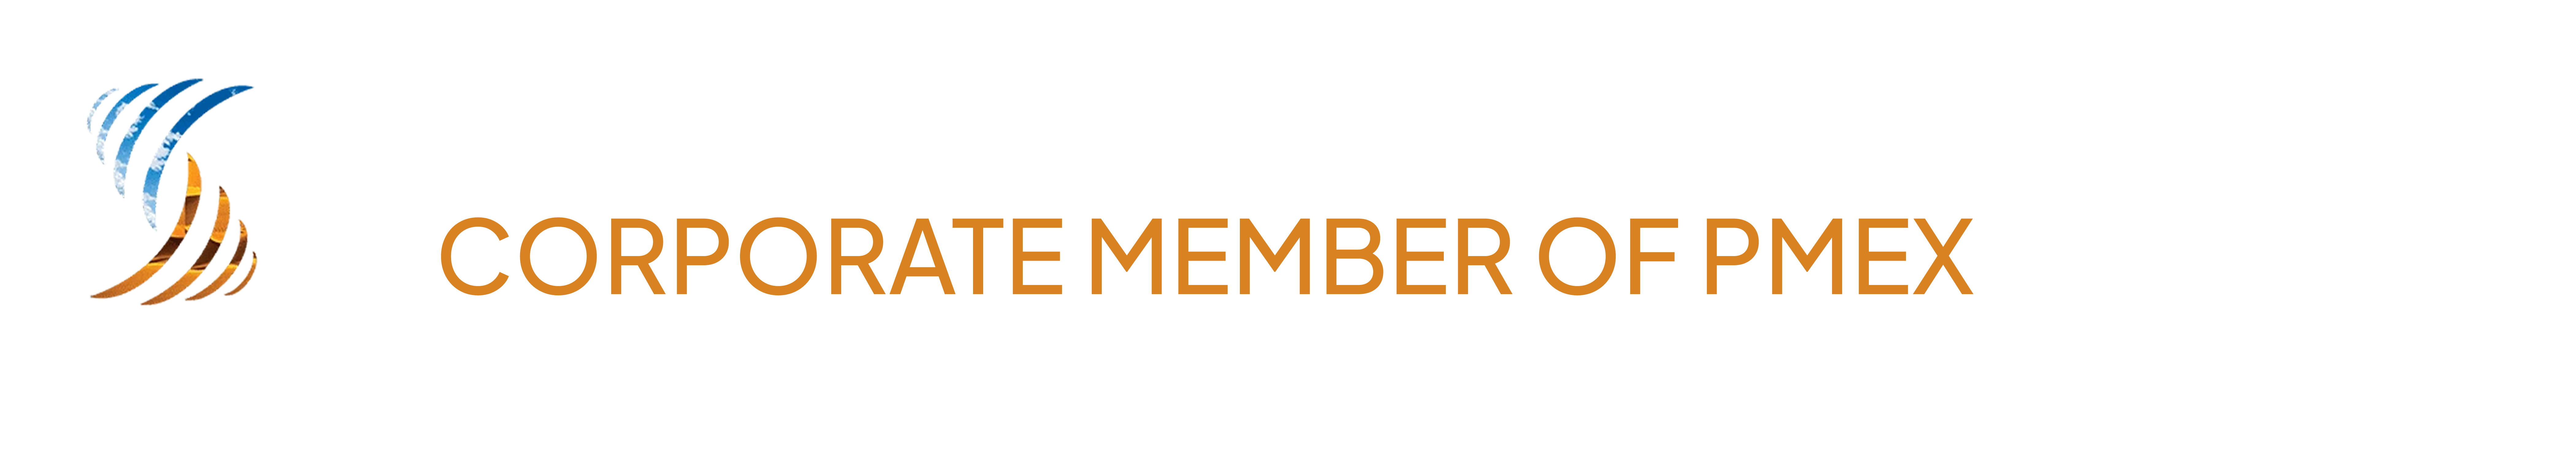 AMANAH STOCKS & COMMODITIES(PRIVATE) LIMITED